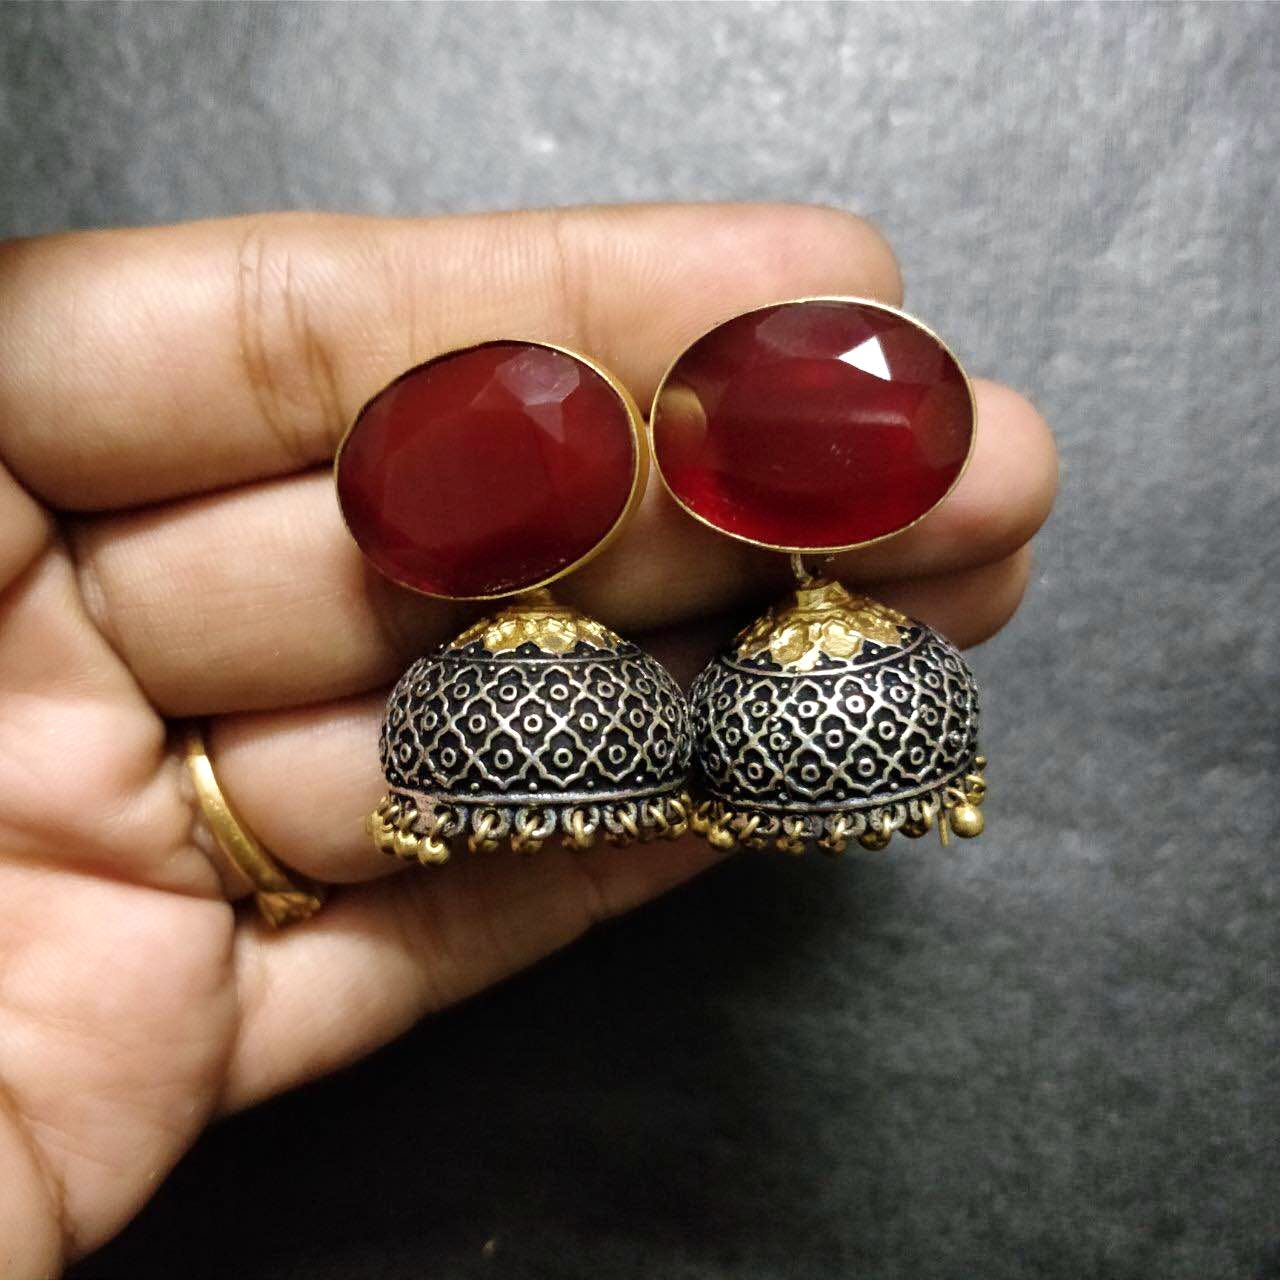 Jewellery,Red,Fashion accessory,Body jewelry,Ruby,Finger,Gemstone,Ring,Gold,Metal